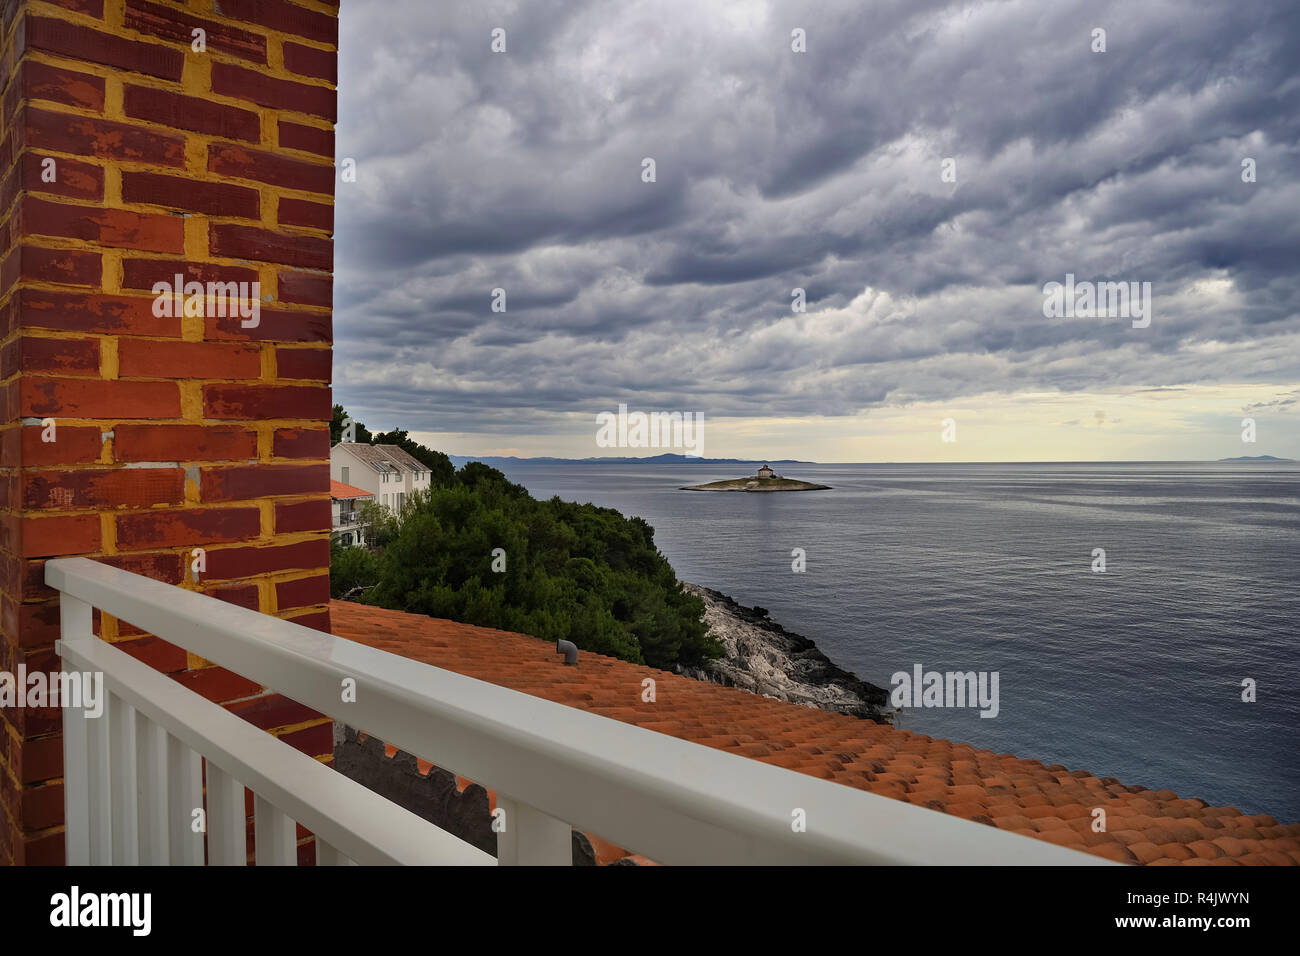 dark clouds over the lighthouse on the island Stock Photo